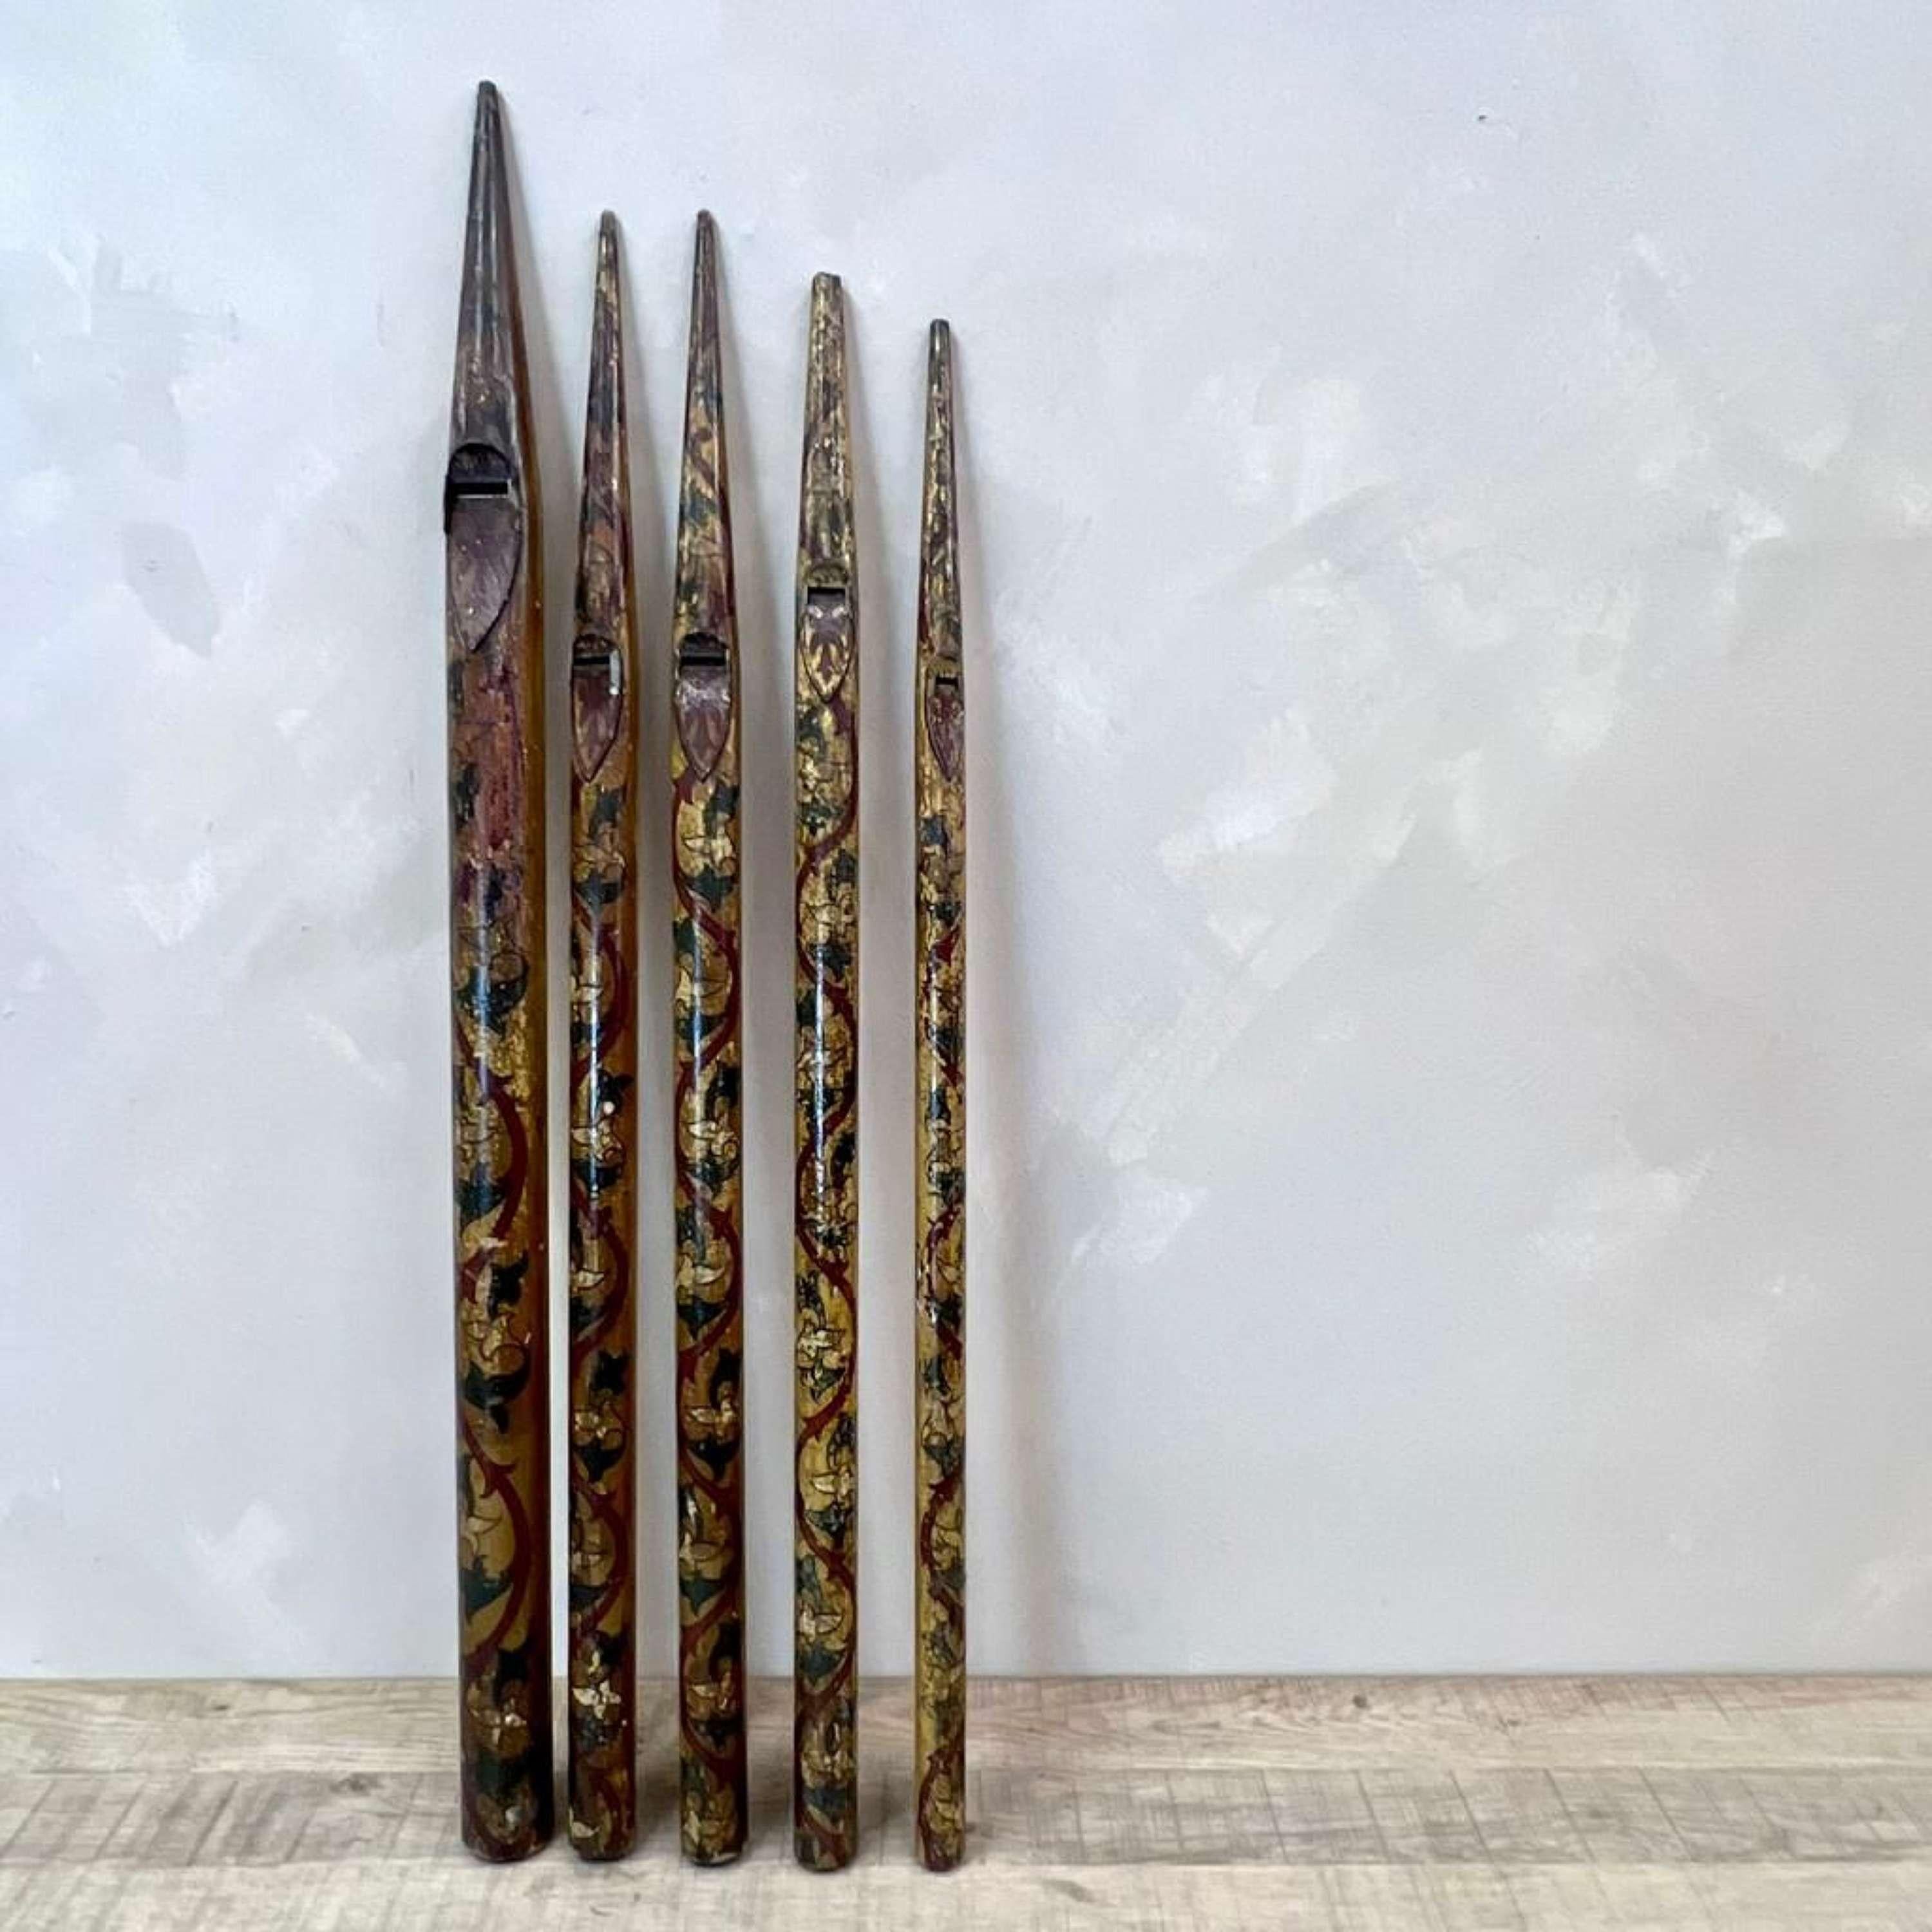 Decorative, pine Organ Pipes, hand painted and hand carved.
Wonderful folk art for the wall.

England c1920

Length - 96 cm / 90 cm/ 90 cm / 87 cm / 85 cm
Width - 5 cm / 4 cm / 4 cm / 4 cm / 3 cm 


Please message if any further info or photos are